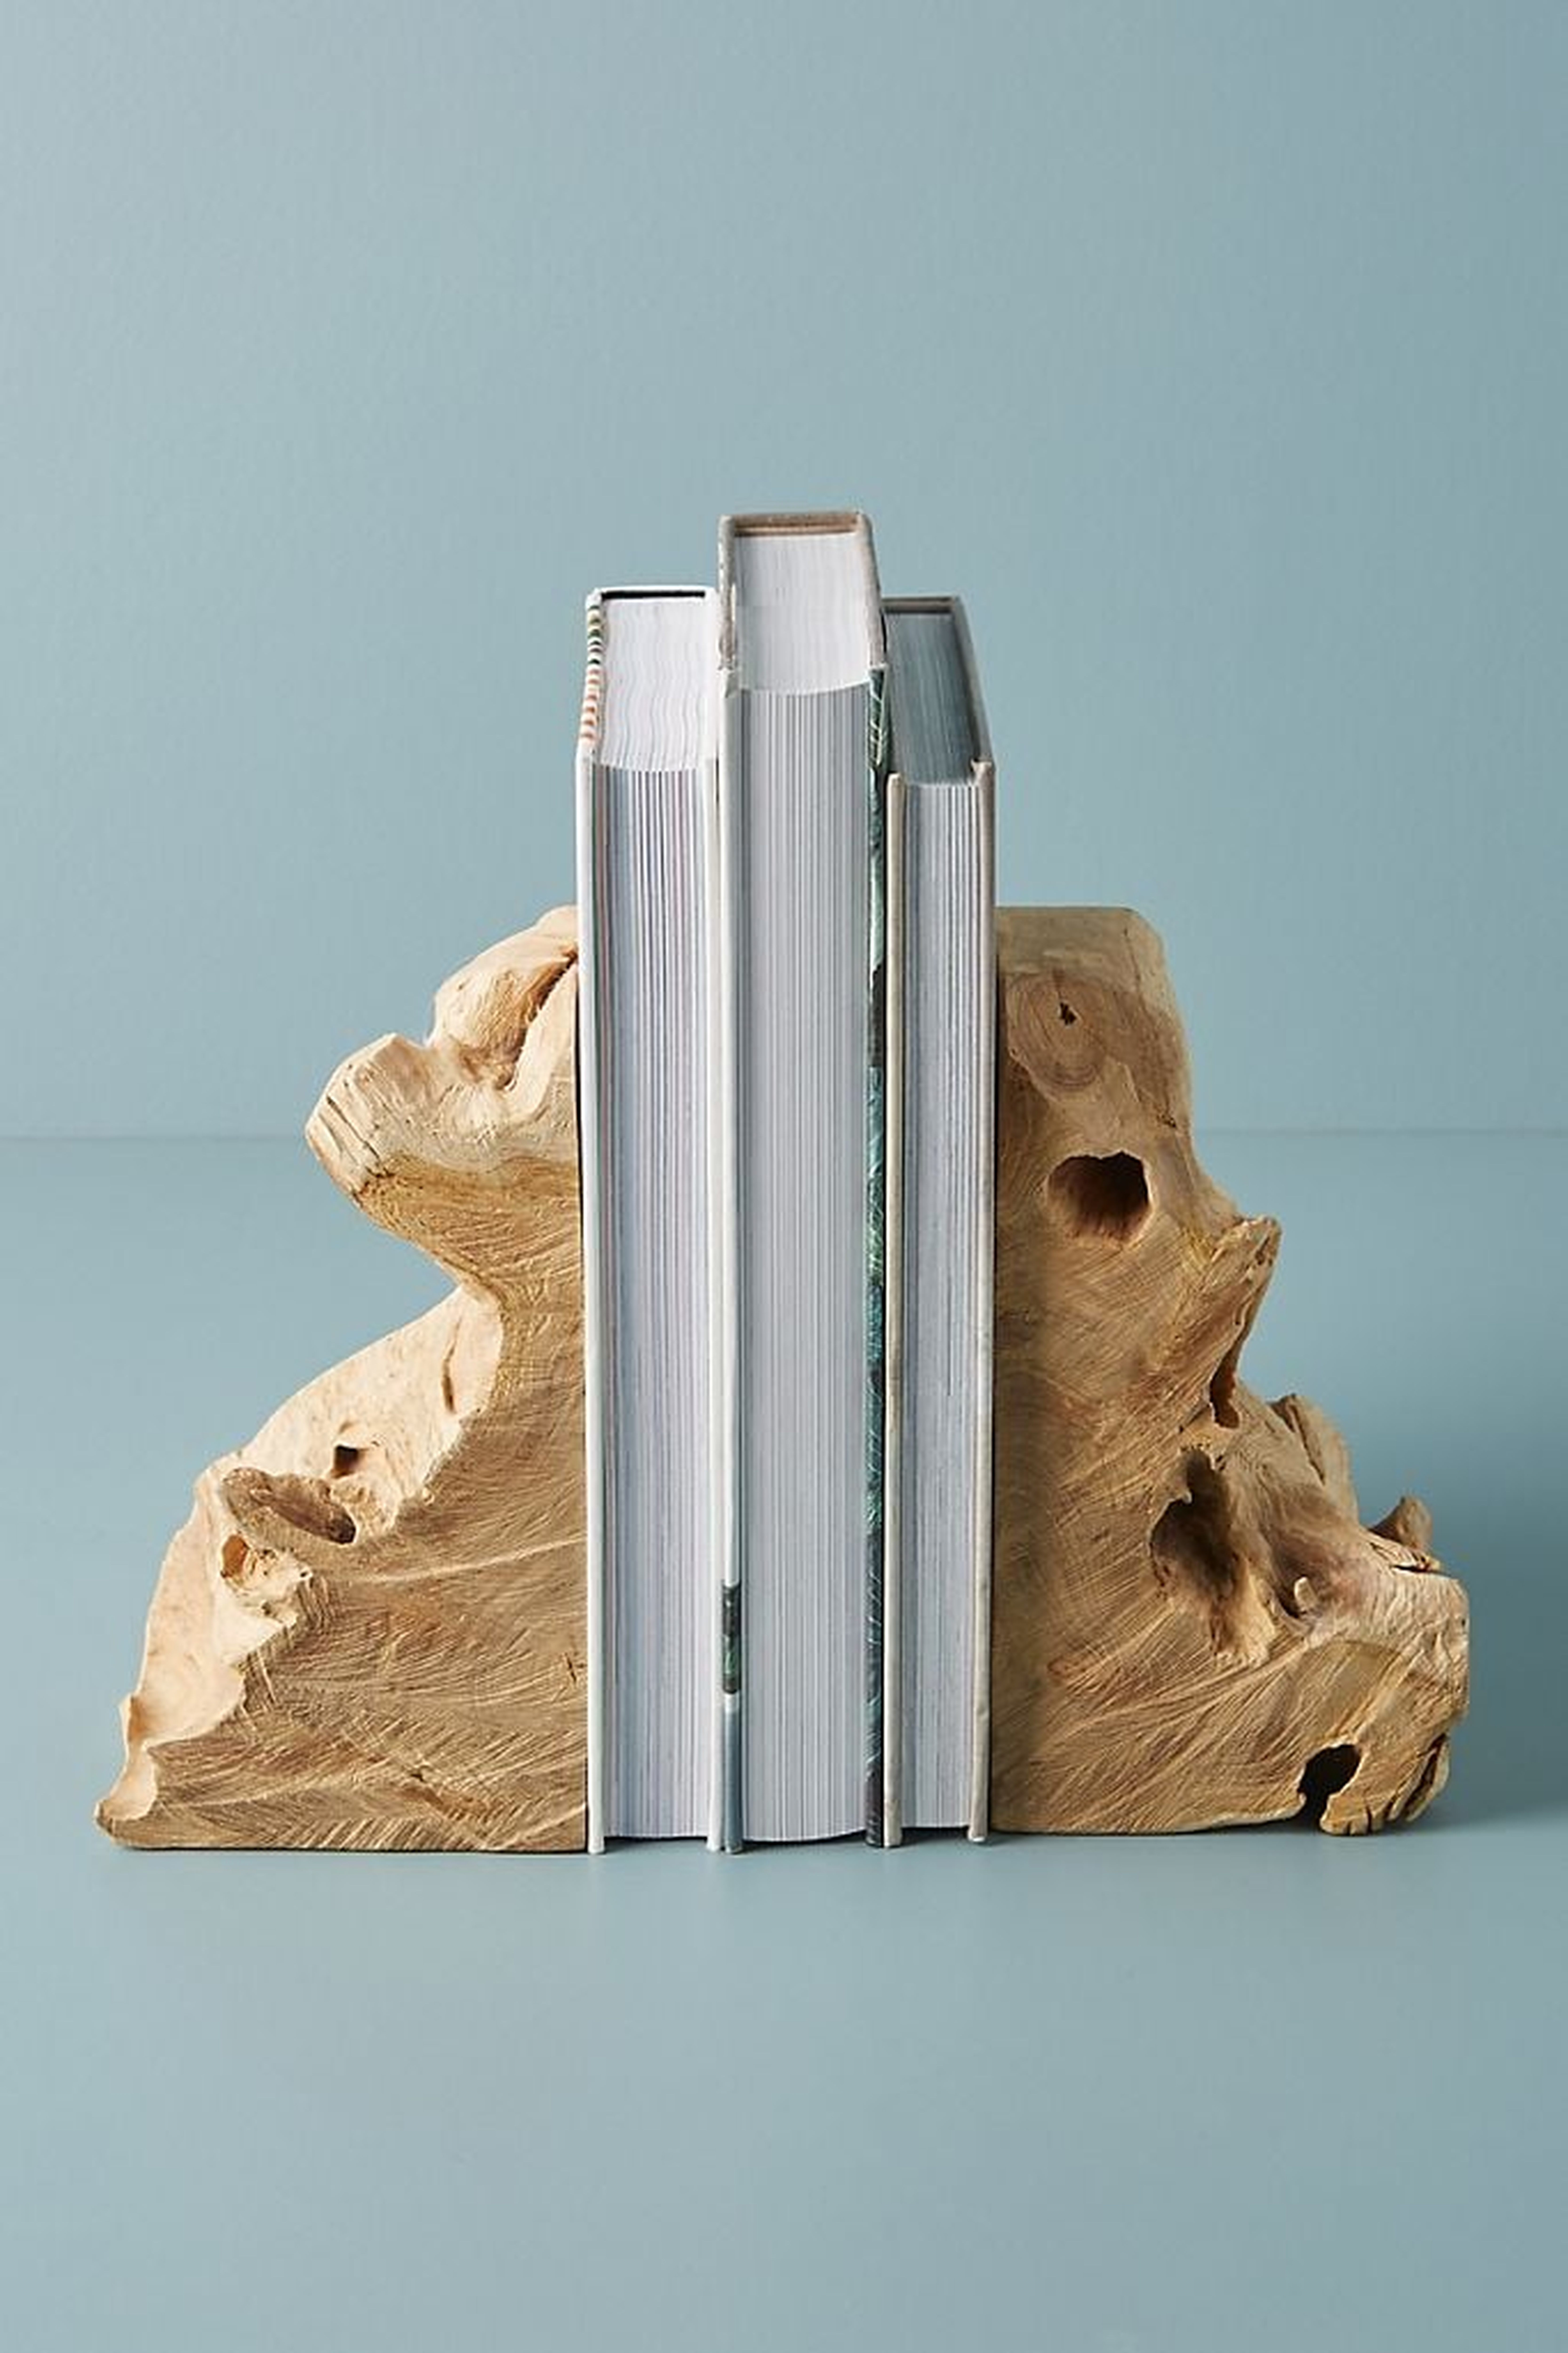 Live-Edge Bookends - Anthropologie